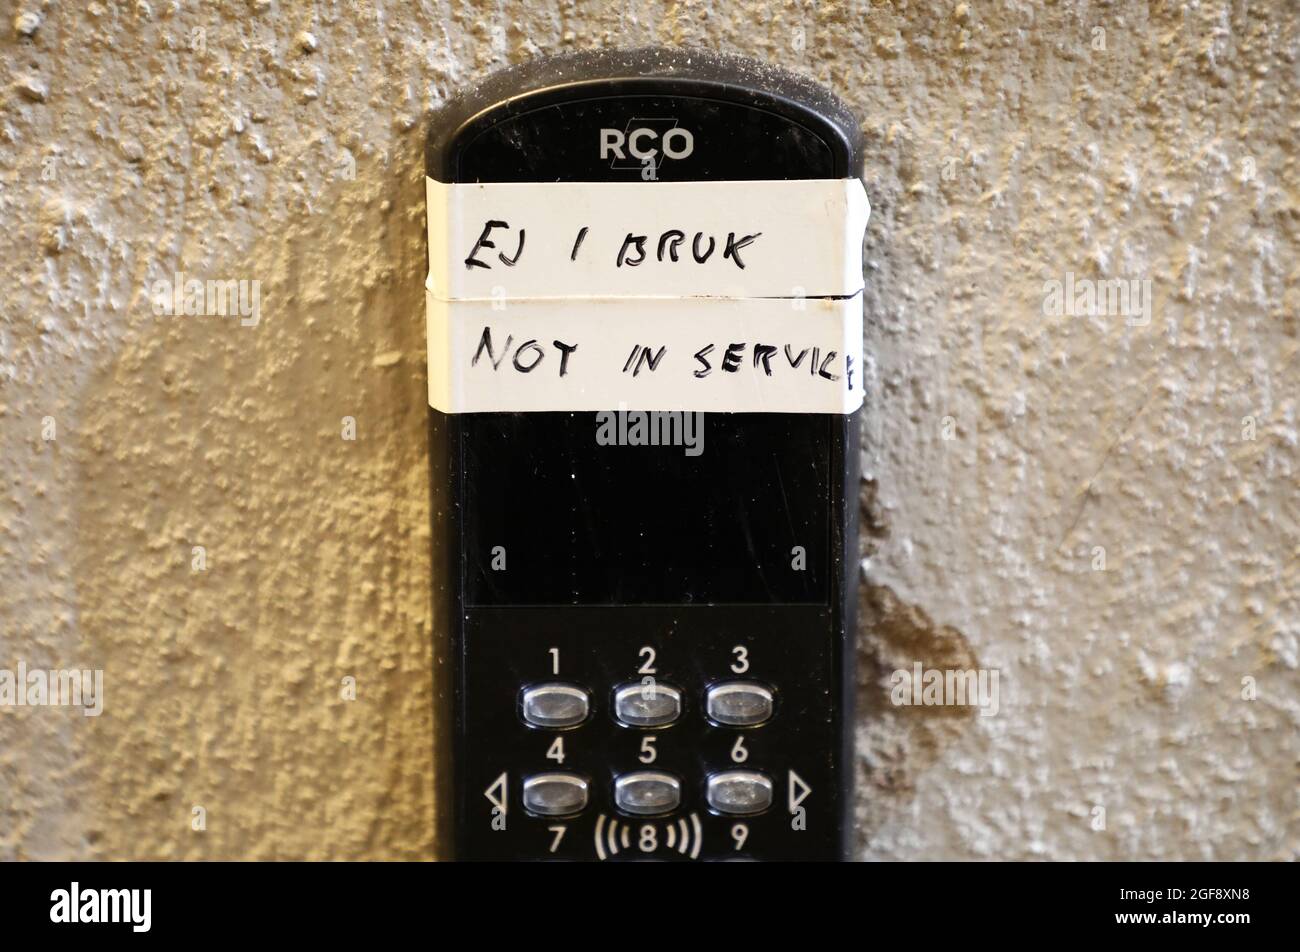 Code lock for a laundry room with the text 'Not in service'. Stock Photo